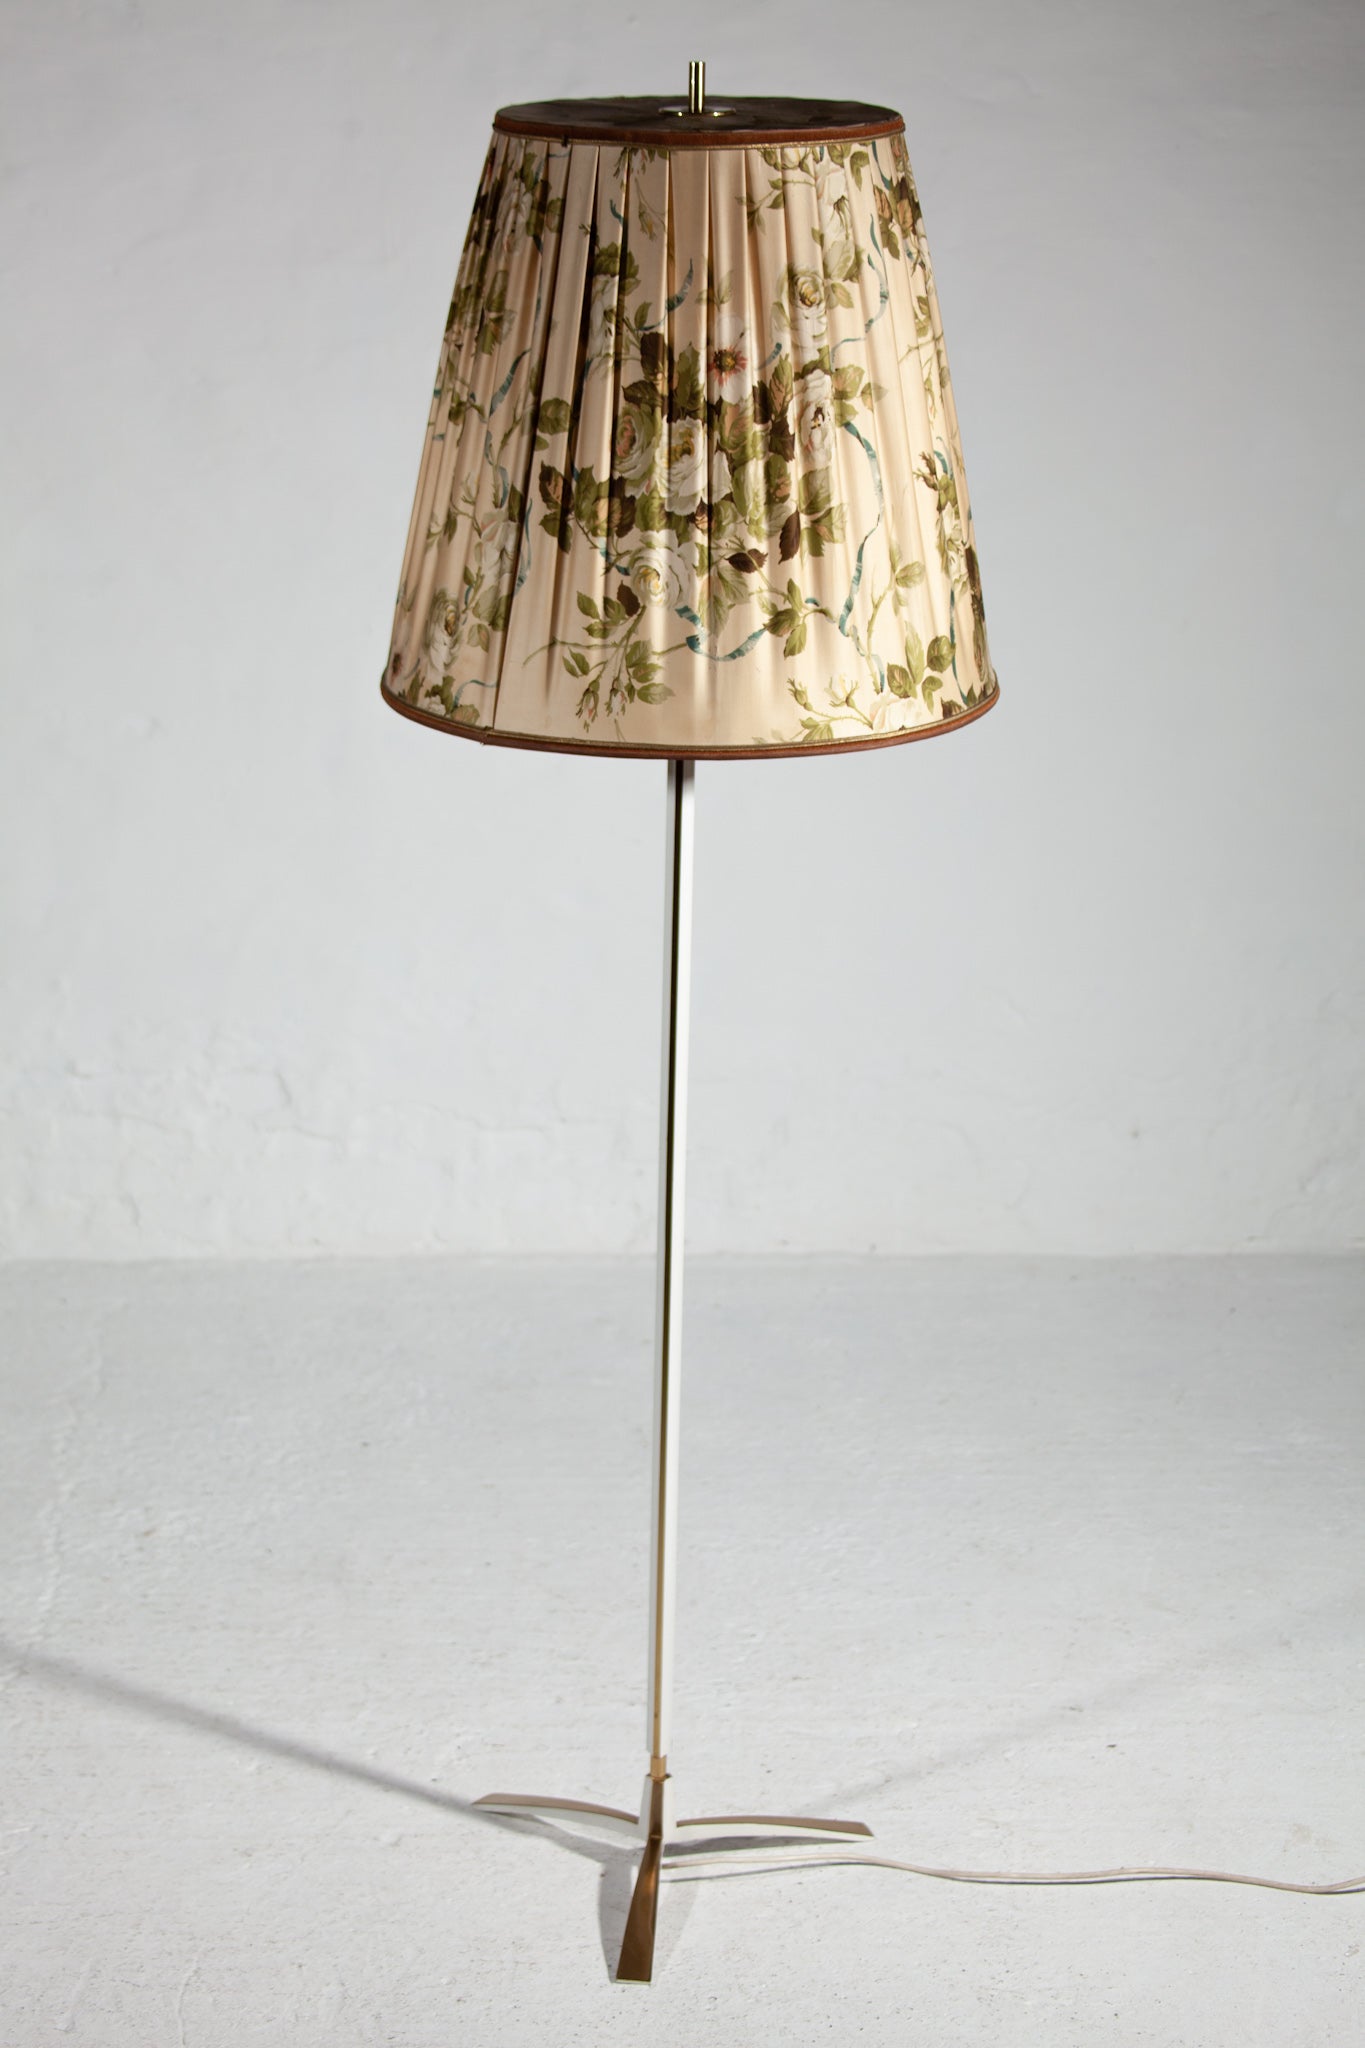 A large brass with accents of white lacquered tripod floor lamp from the fifties with an original print of a floral shade in fabric designed by the Kalmar manufacturer in Austria. The lamp is in excellent condition with nice patina on the brass.